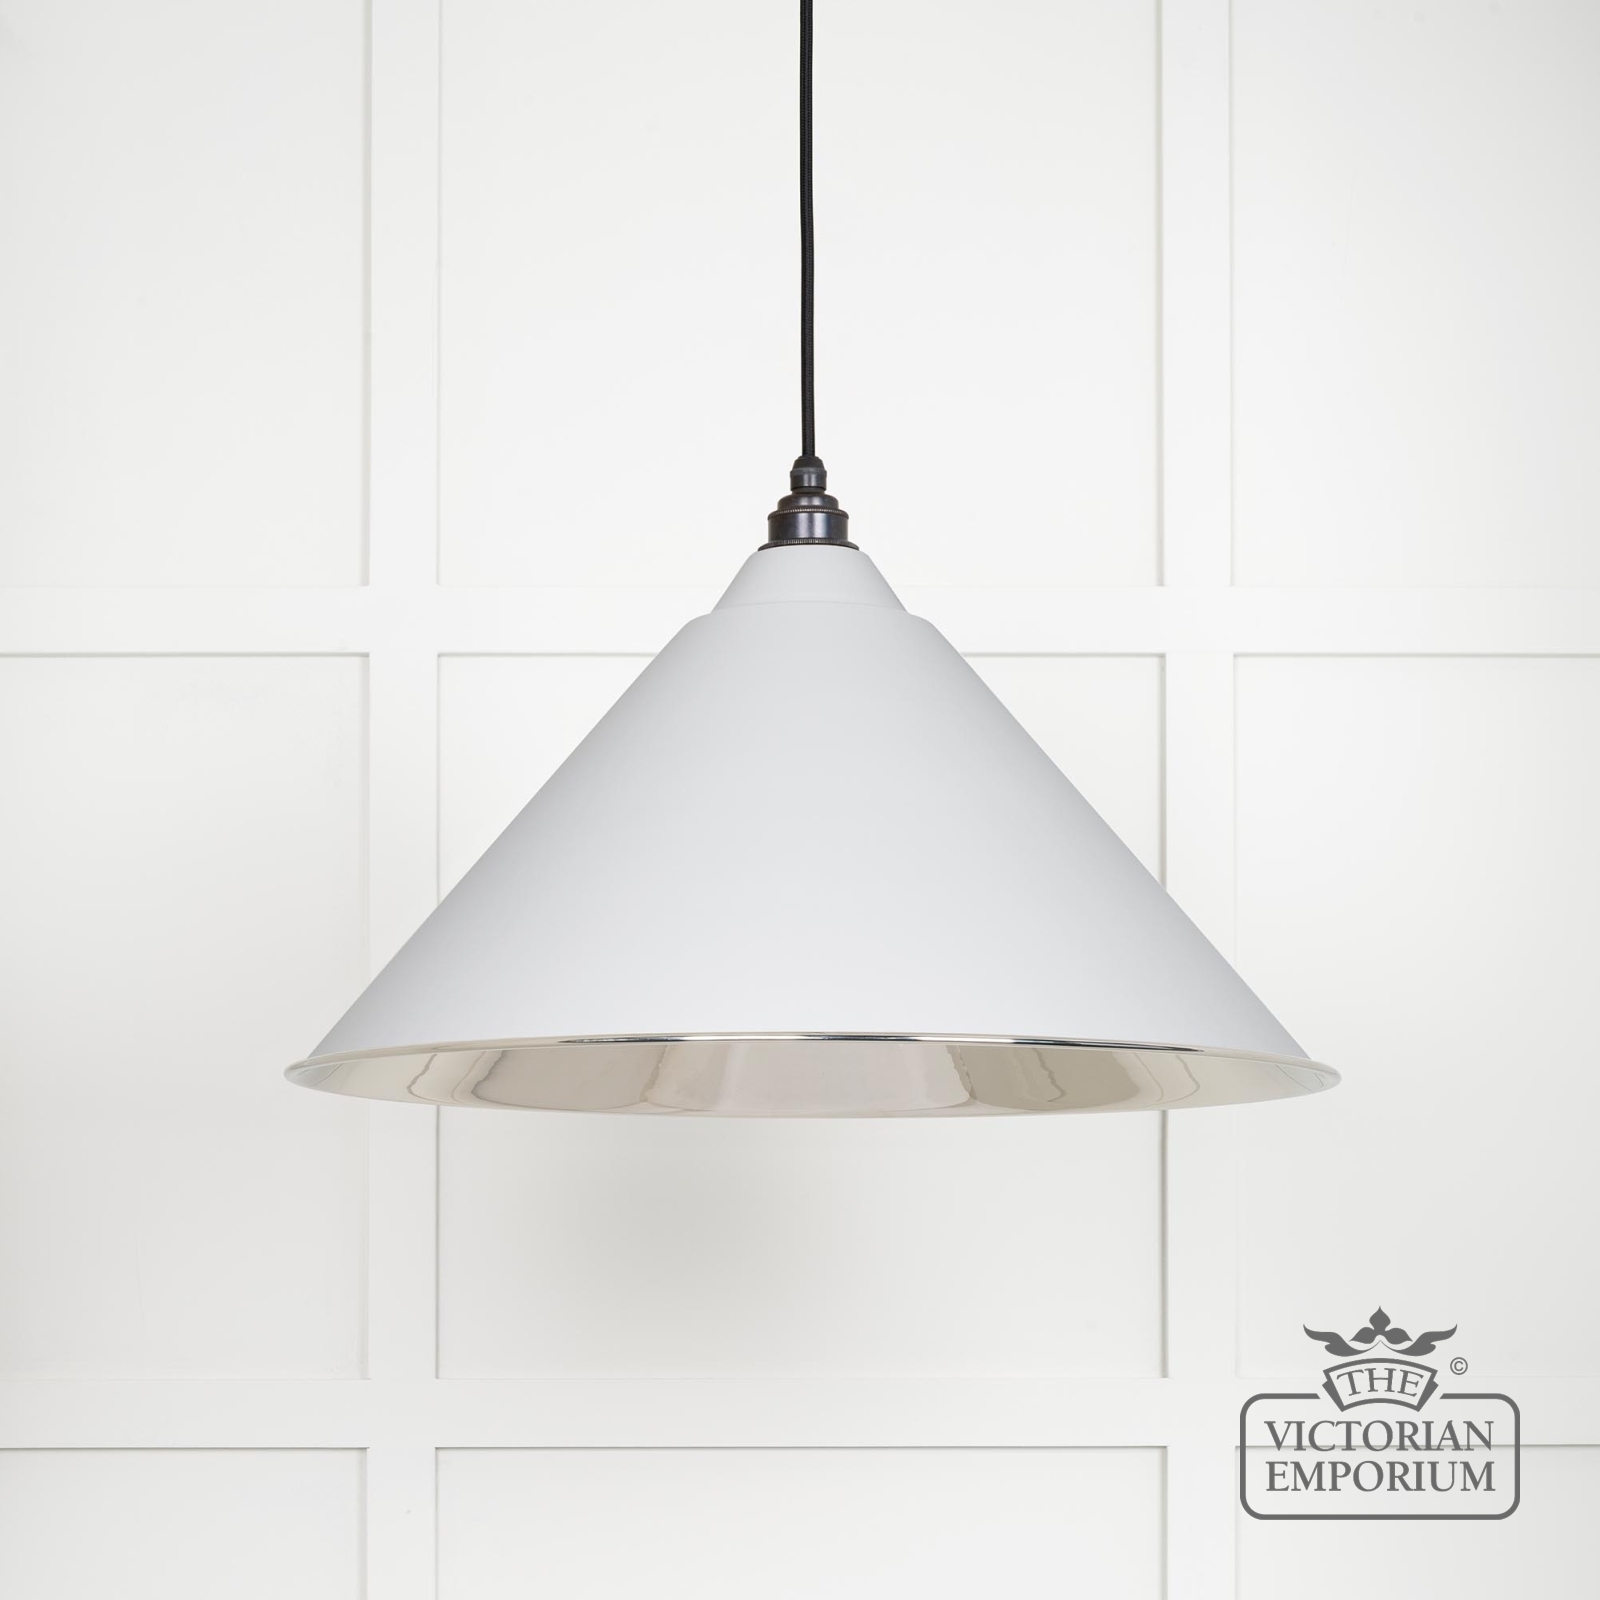 Hockliffe pendant light in smooth nickel and Flock exterior